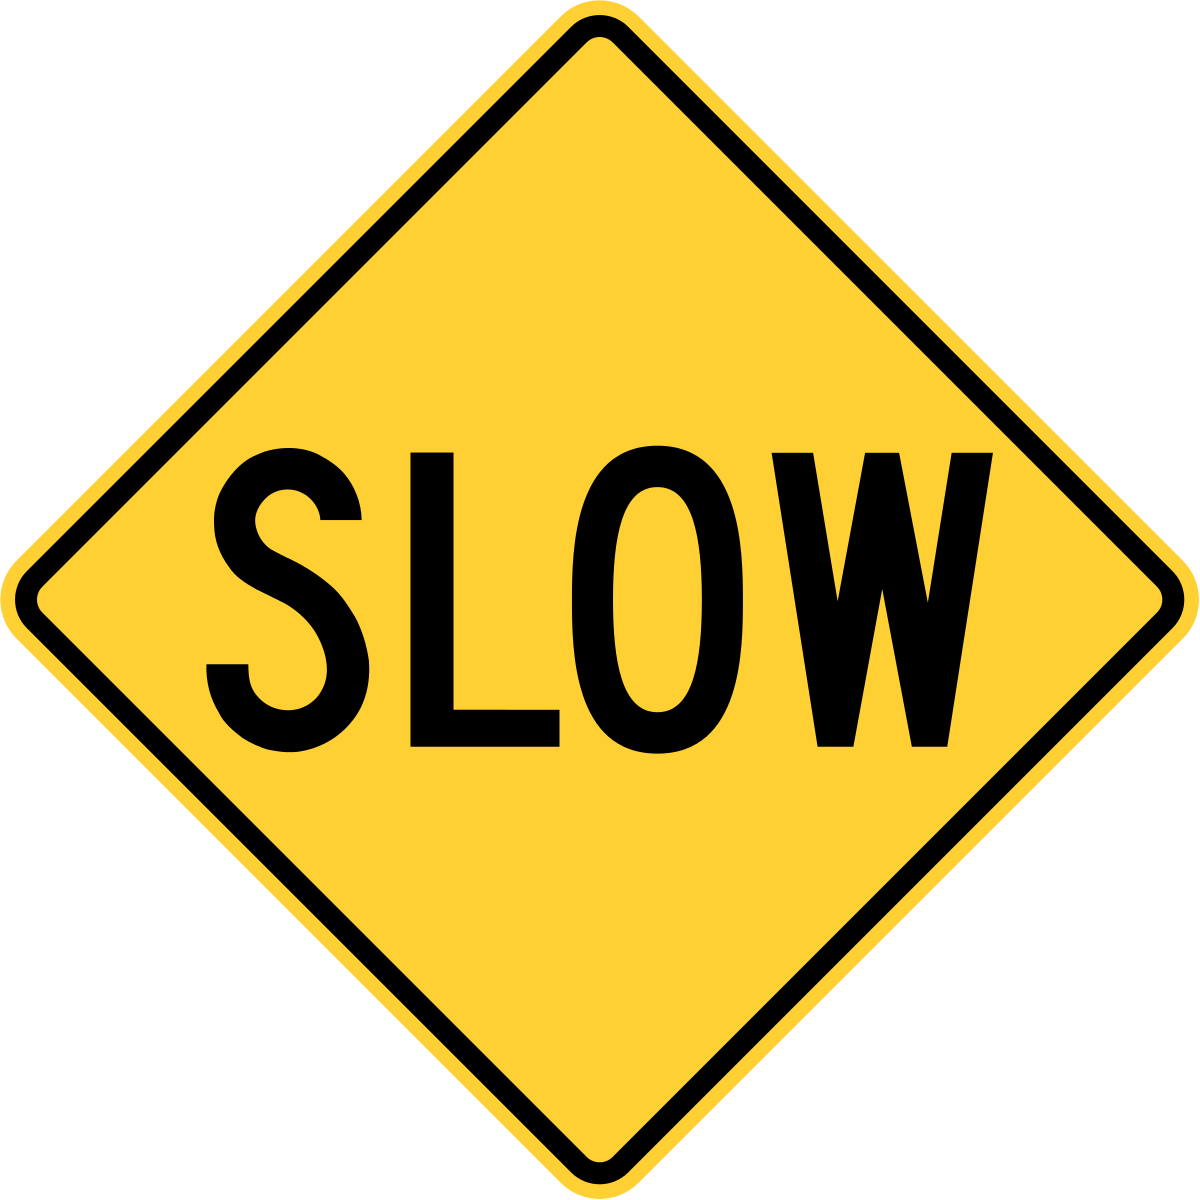 Slow Sign PNG Free Download